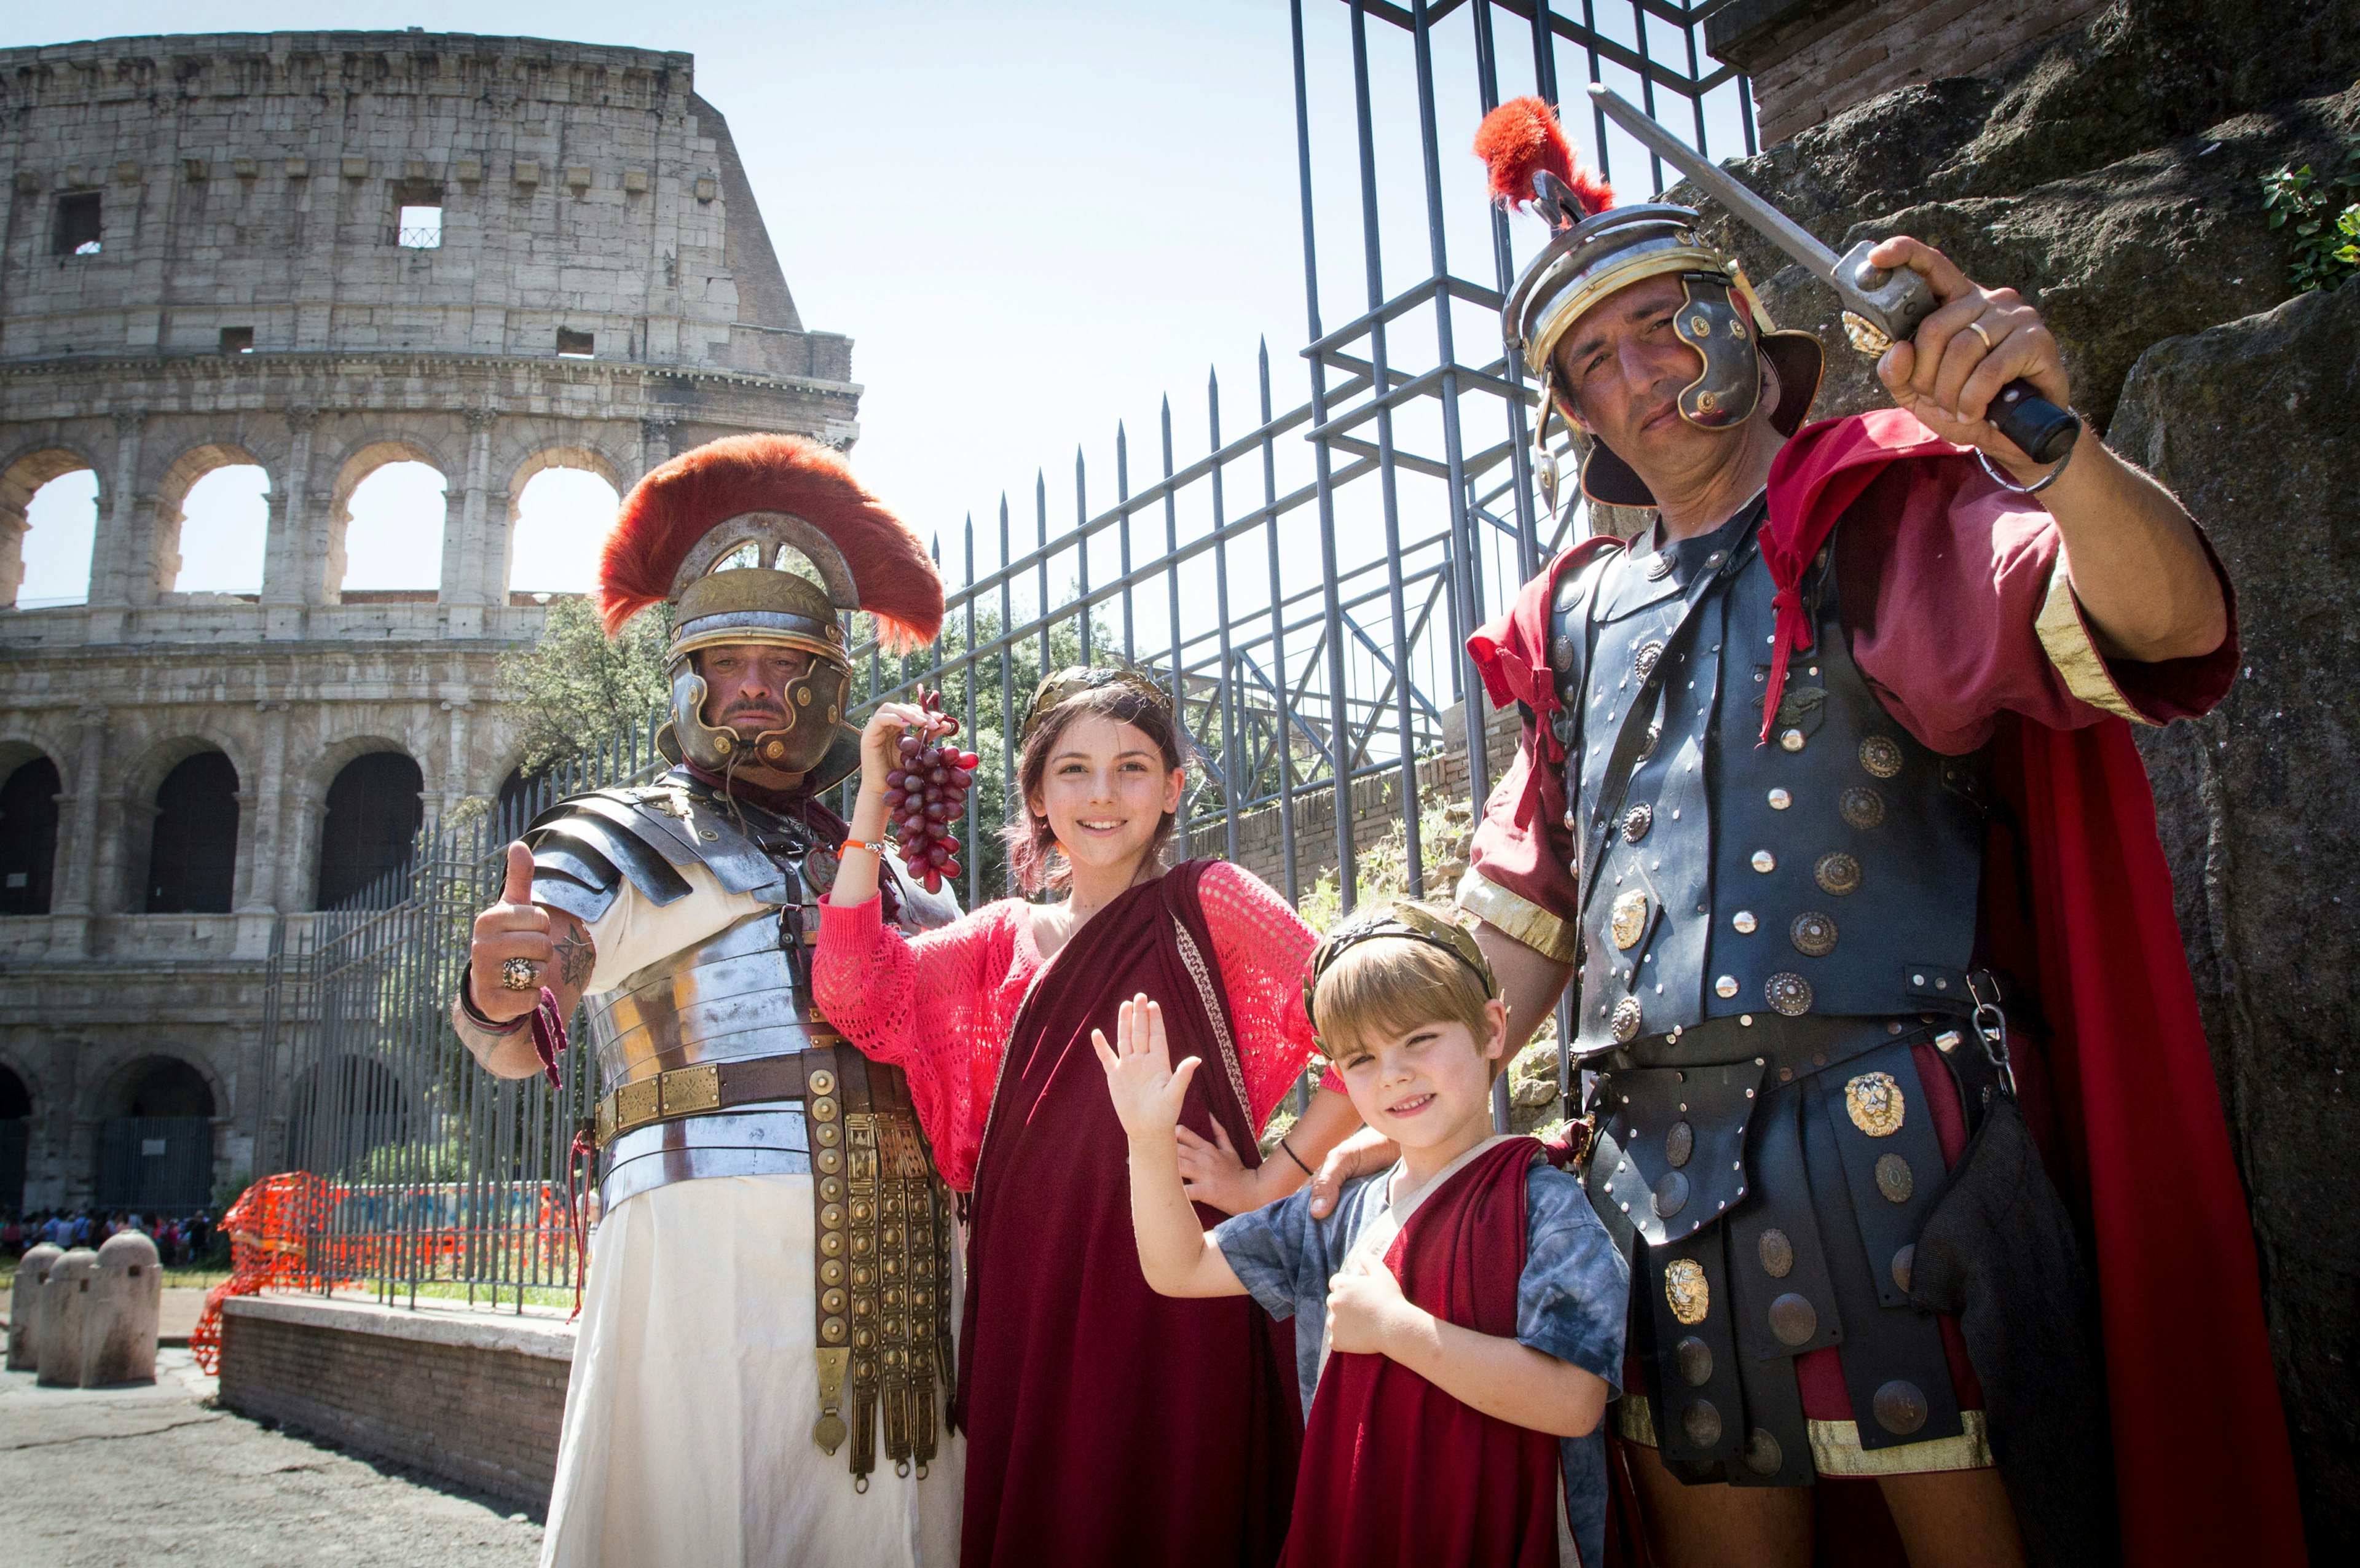 June 20, 2013: Two kids dressed like ancient Romans, pose with two centurion impersonators outside the Colosseum.